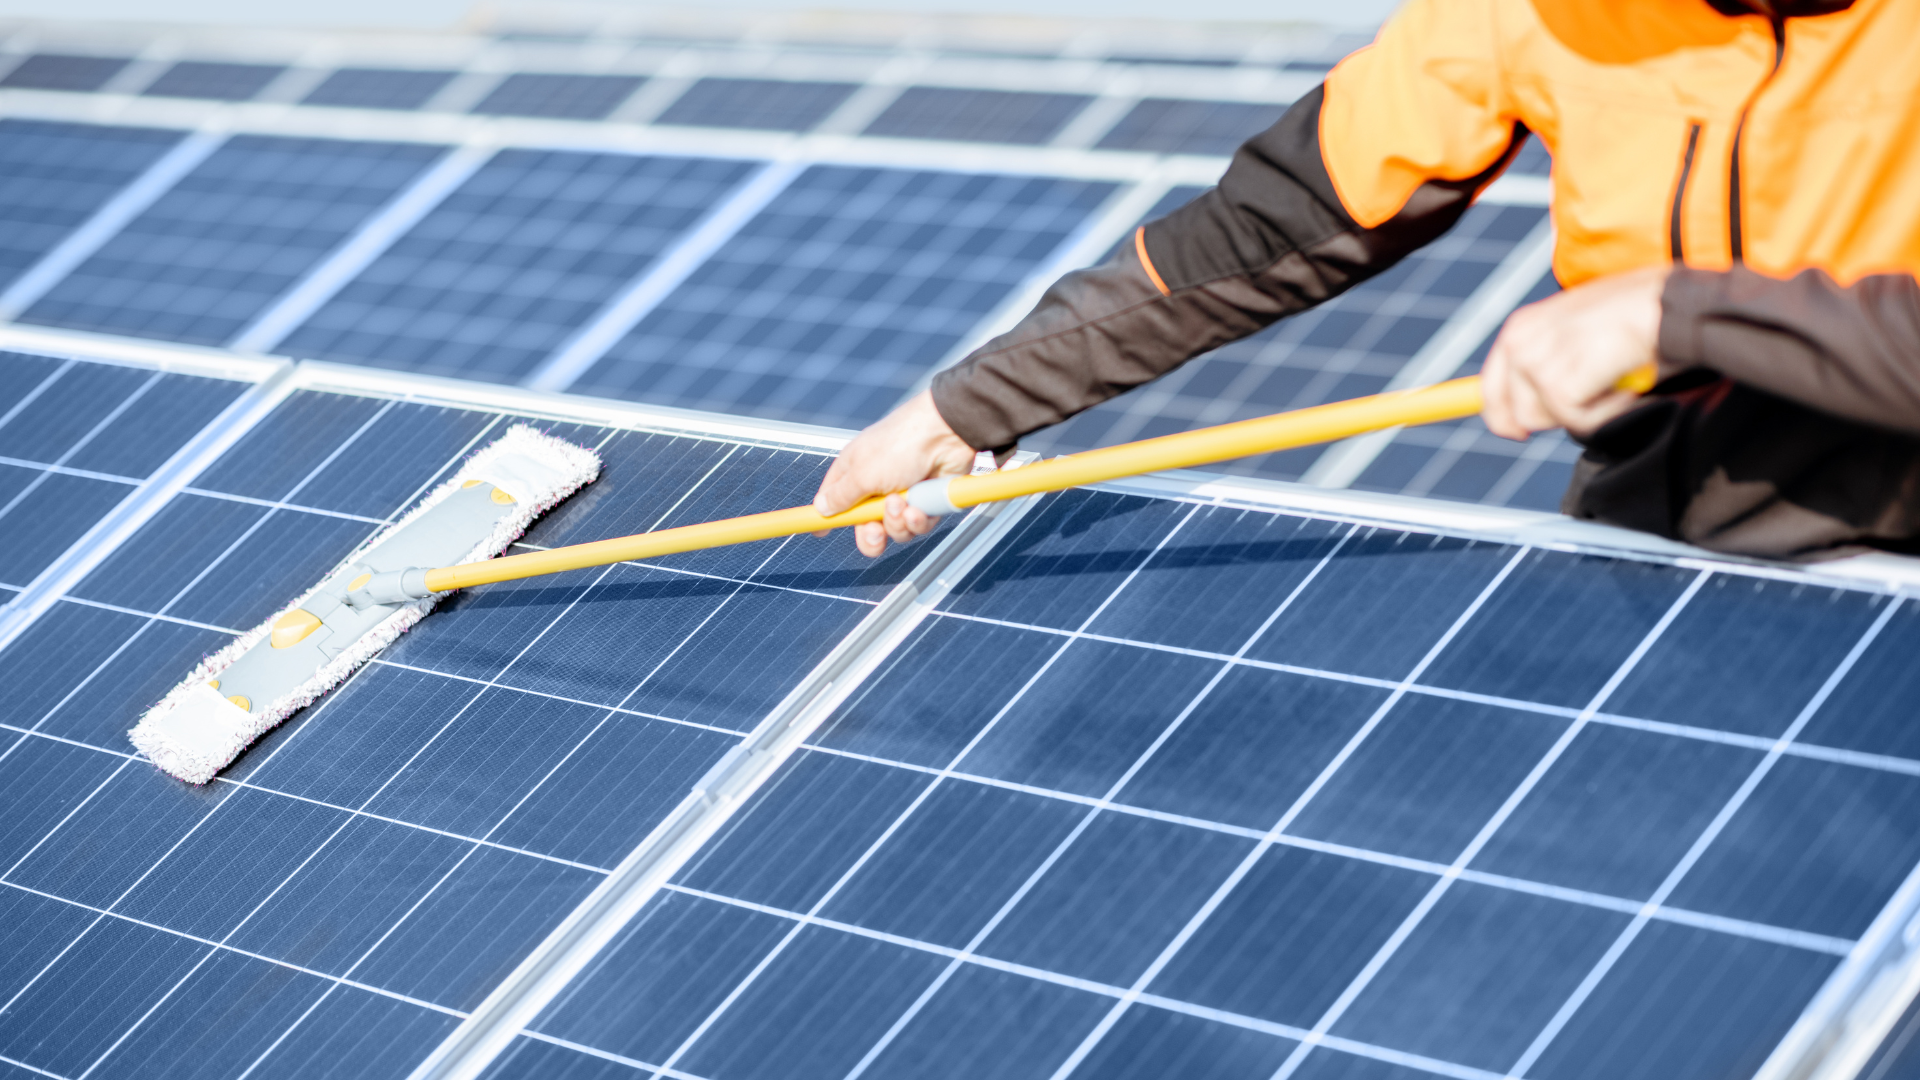 Cleaning solar panels with a mop